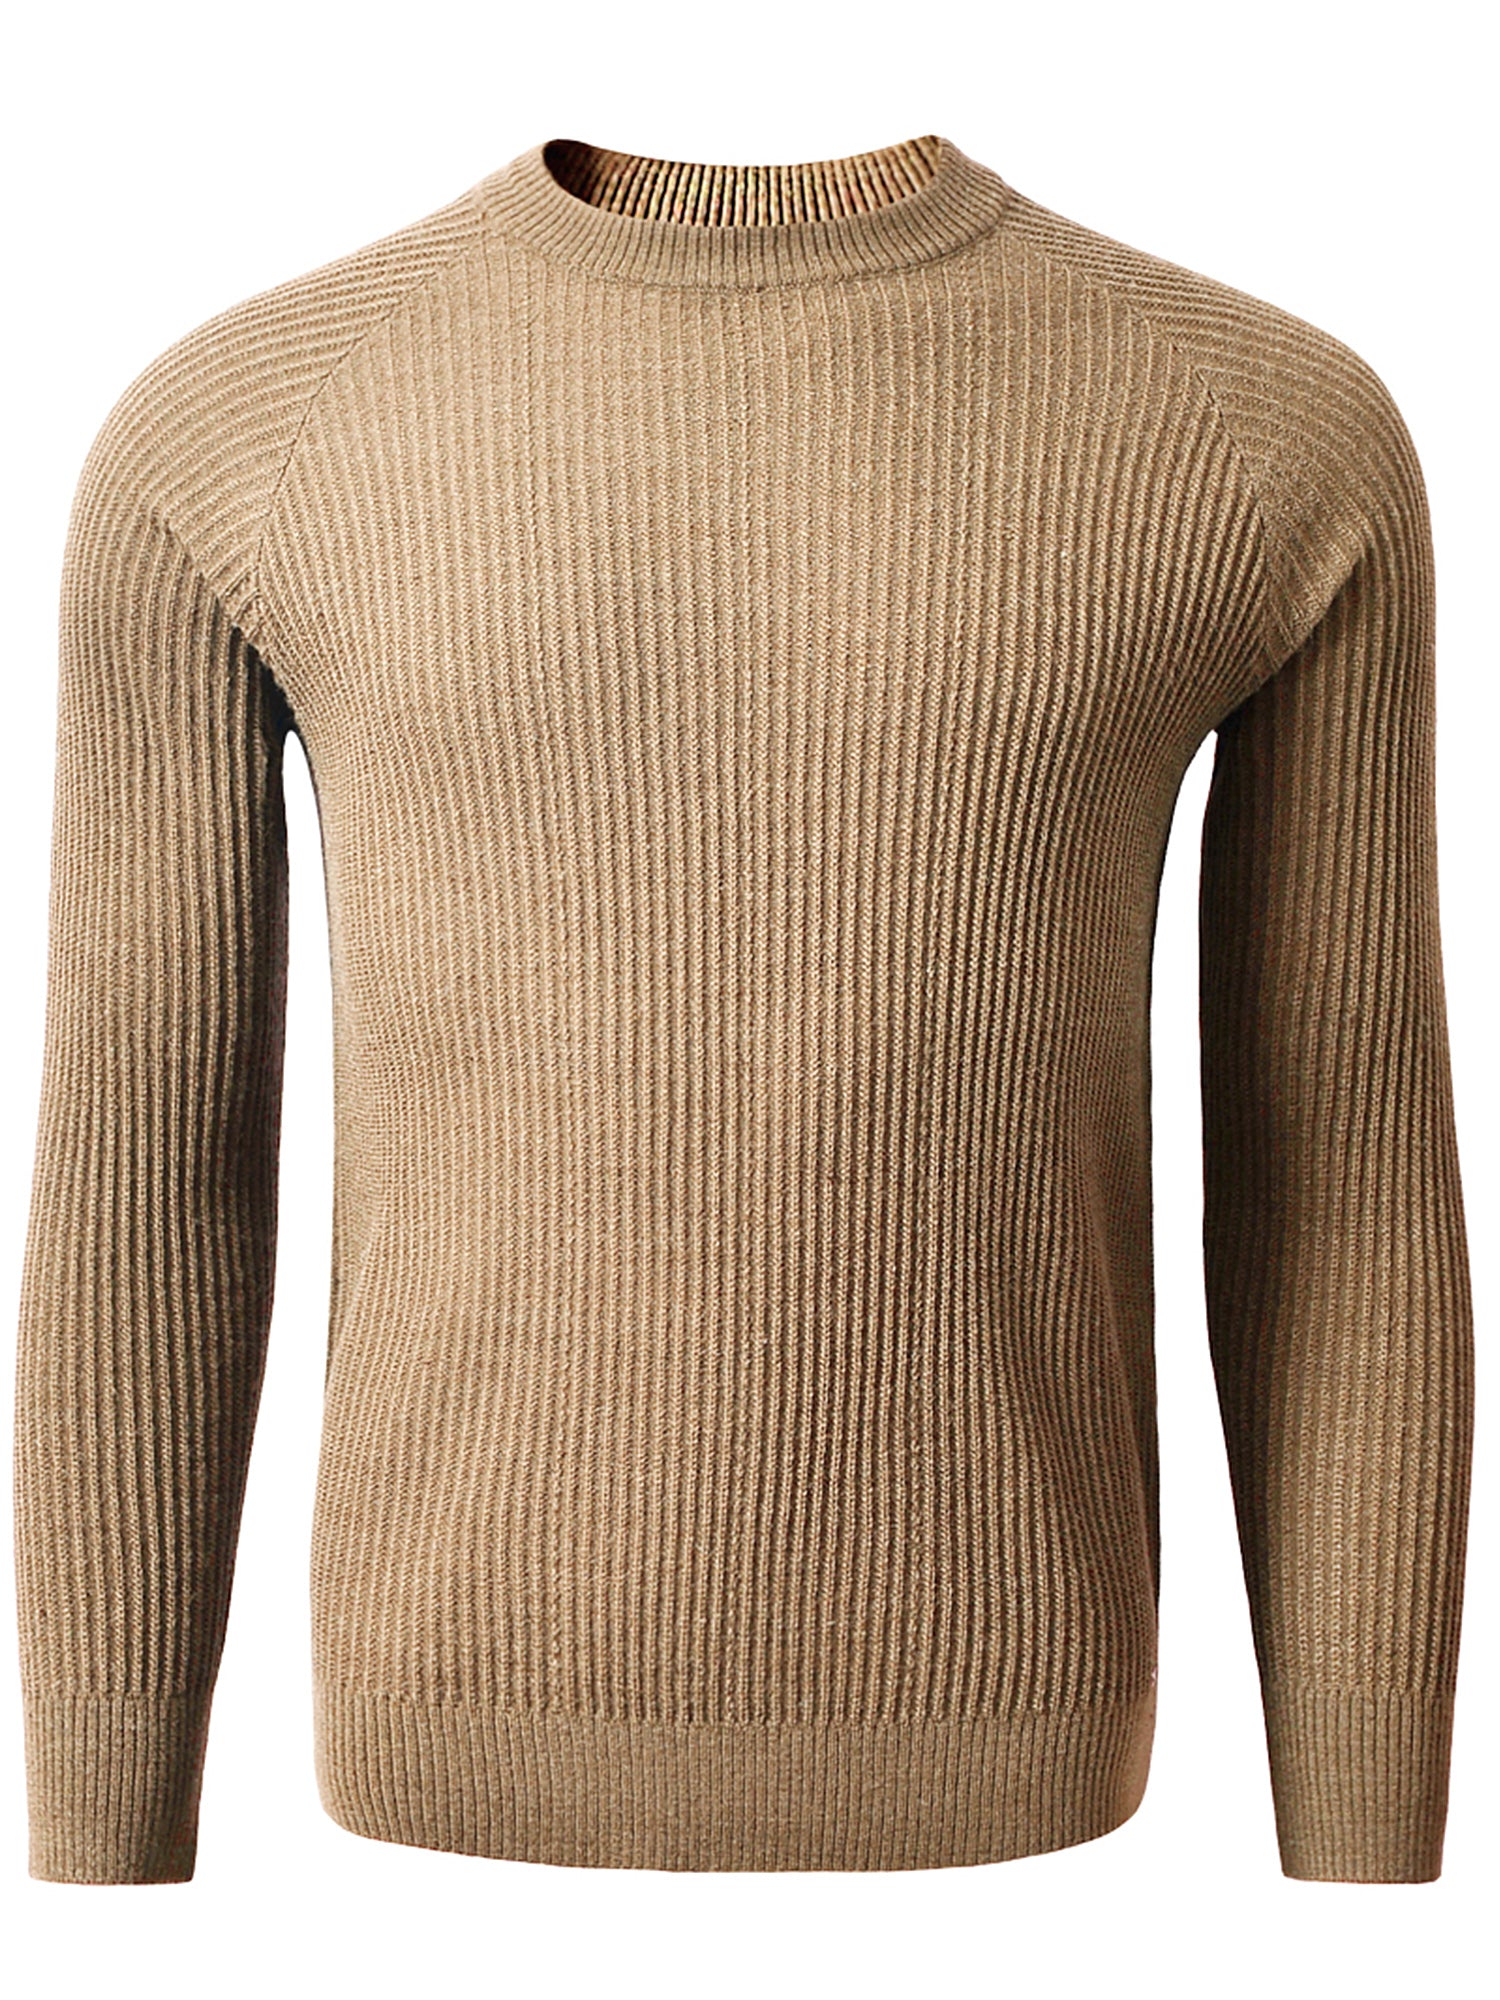 Men's Casual Warm Slightly Stretch Crew Neck Pullover Sweater